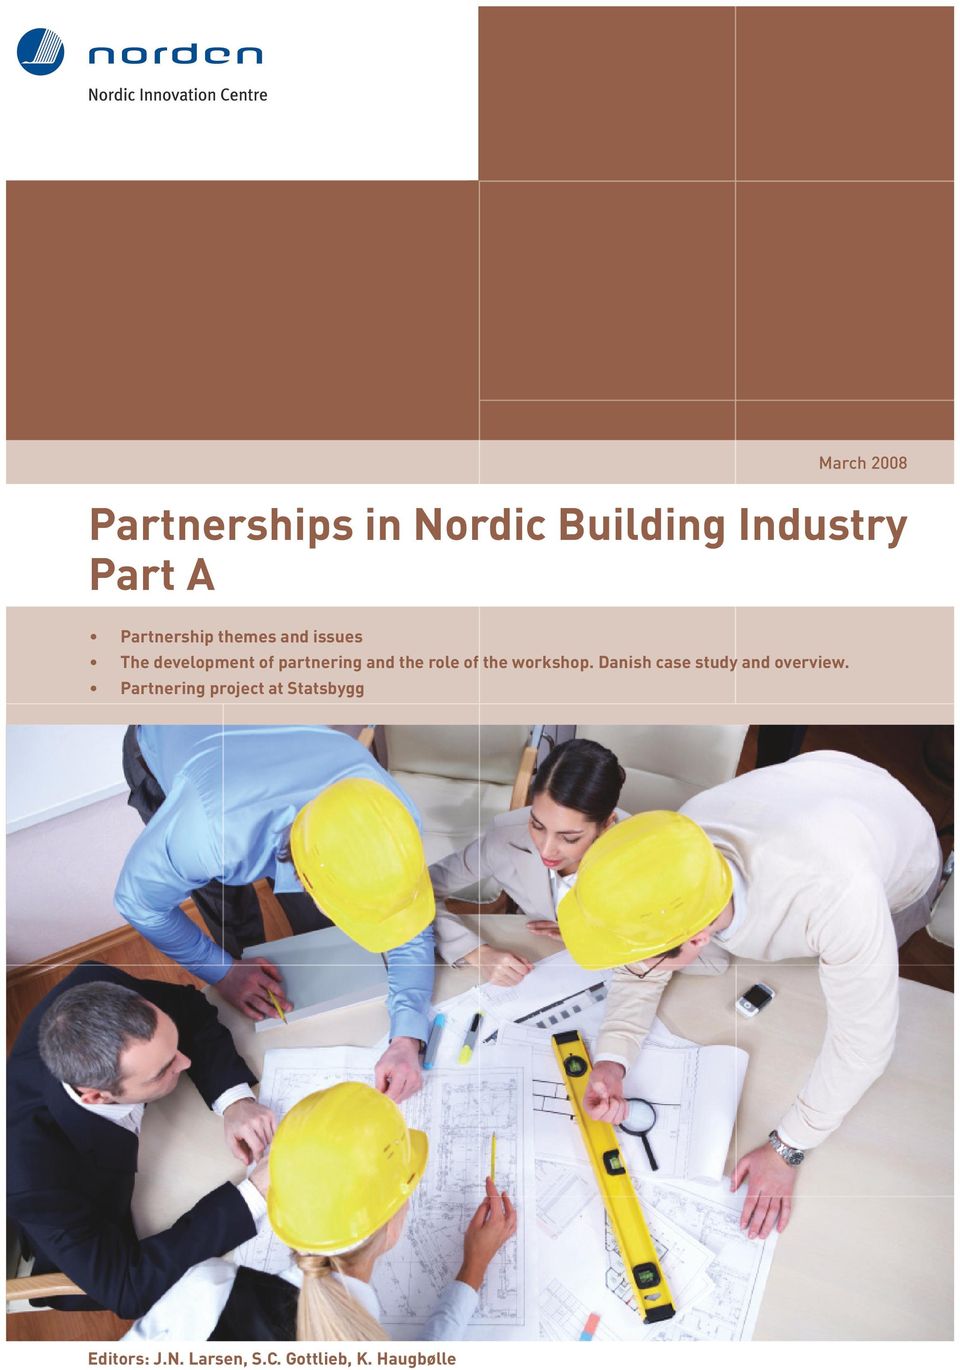 the role of the workshop. Danish case study and overview.